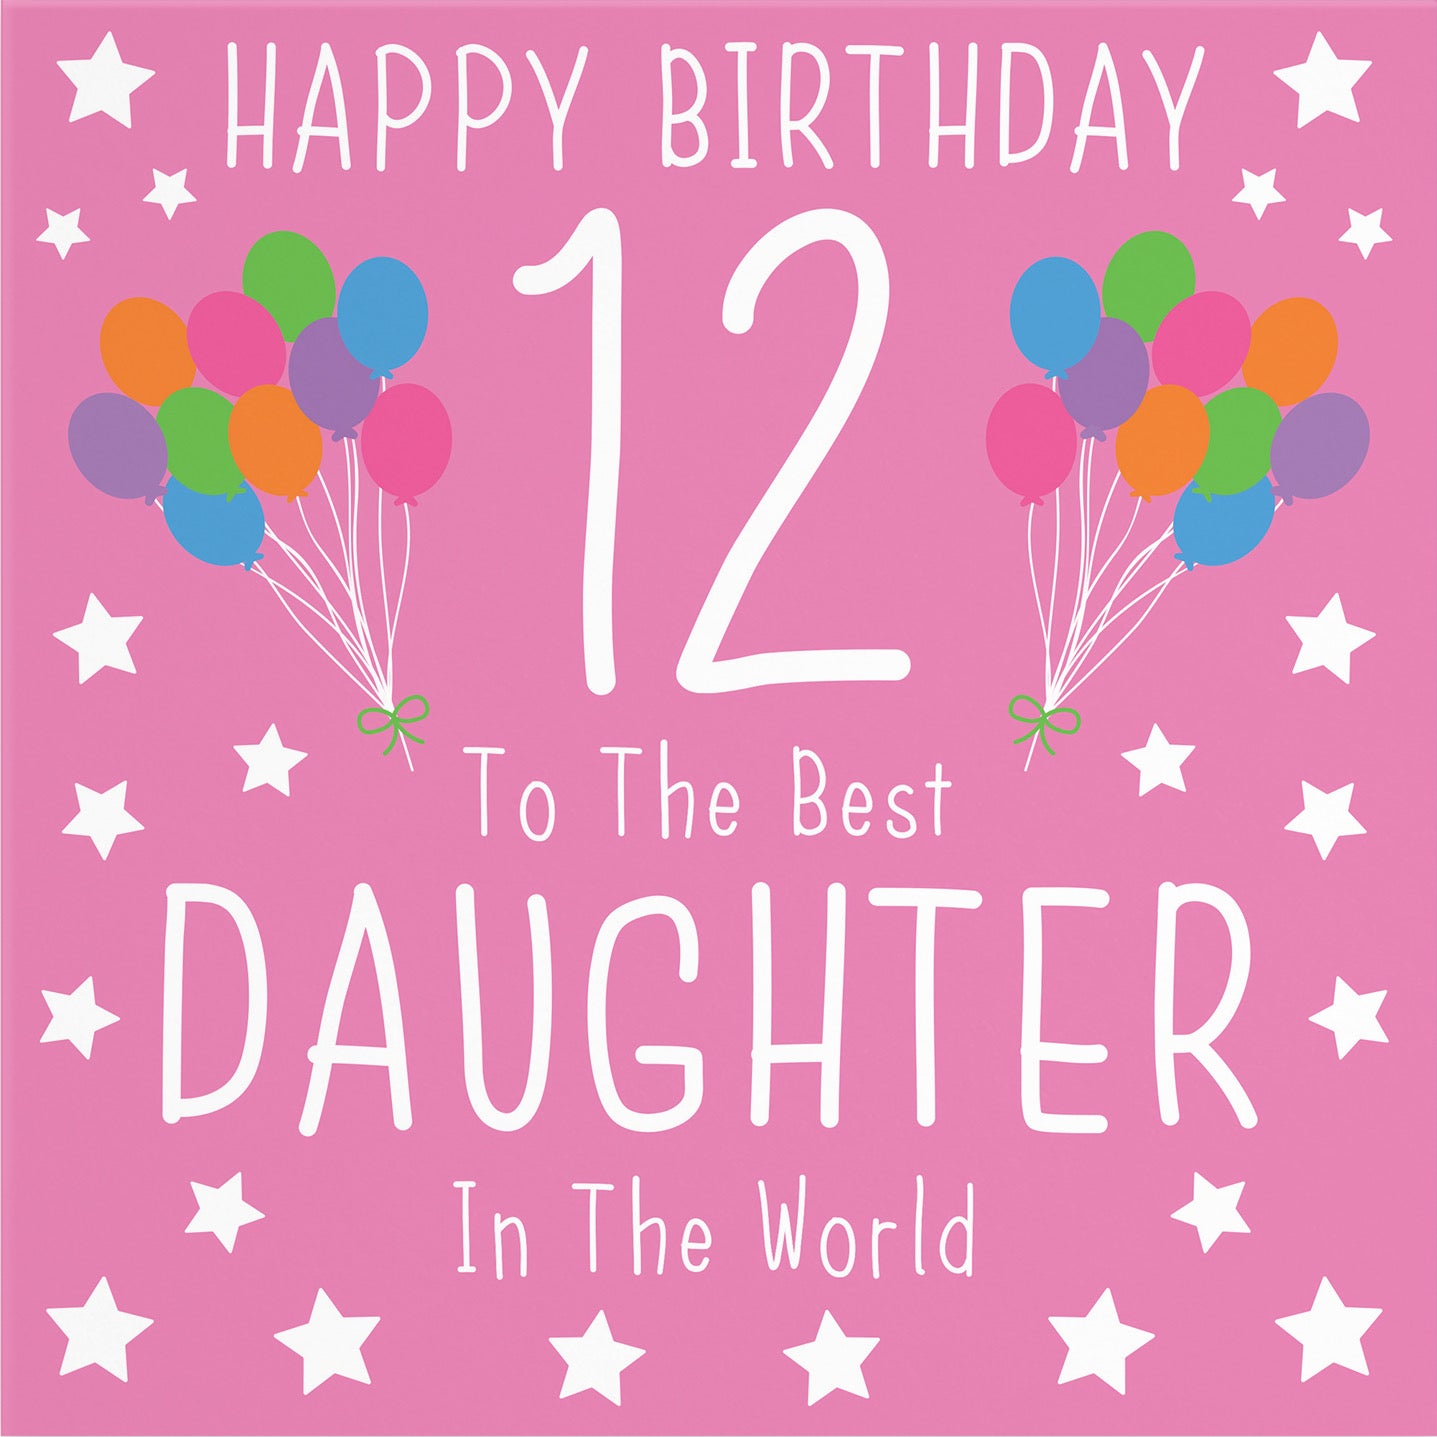 Large Daughter 12th Birthday Card Iconic - Default Title (B0BBMTLDPQ)